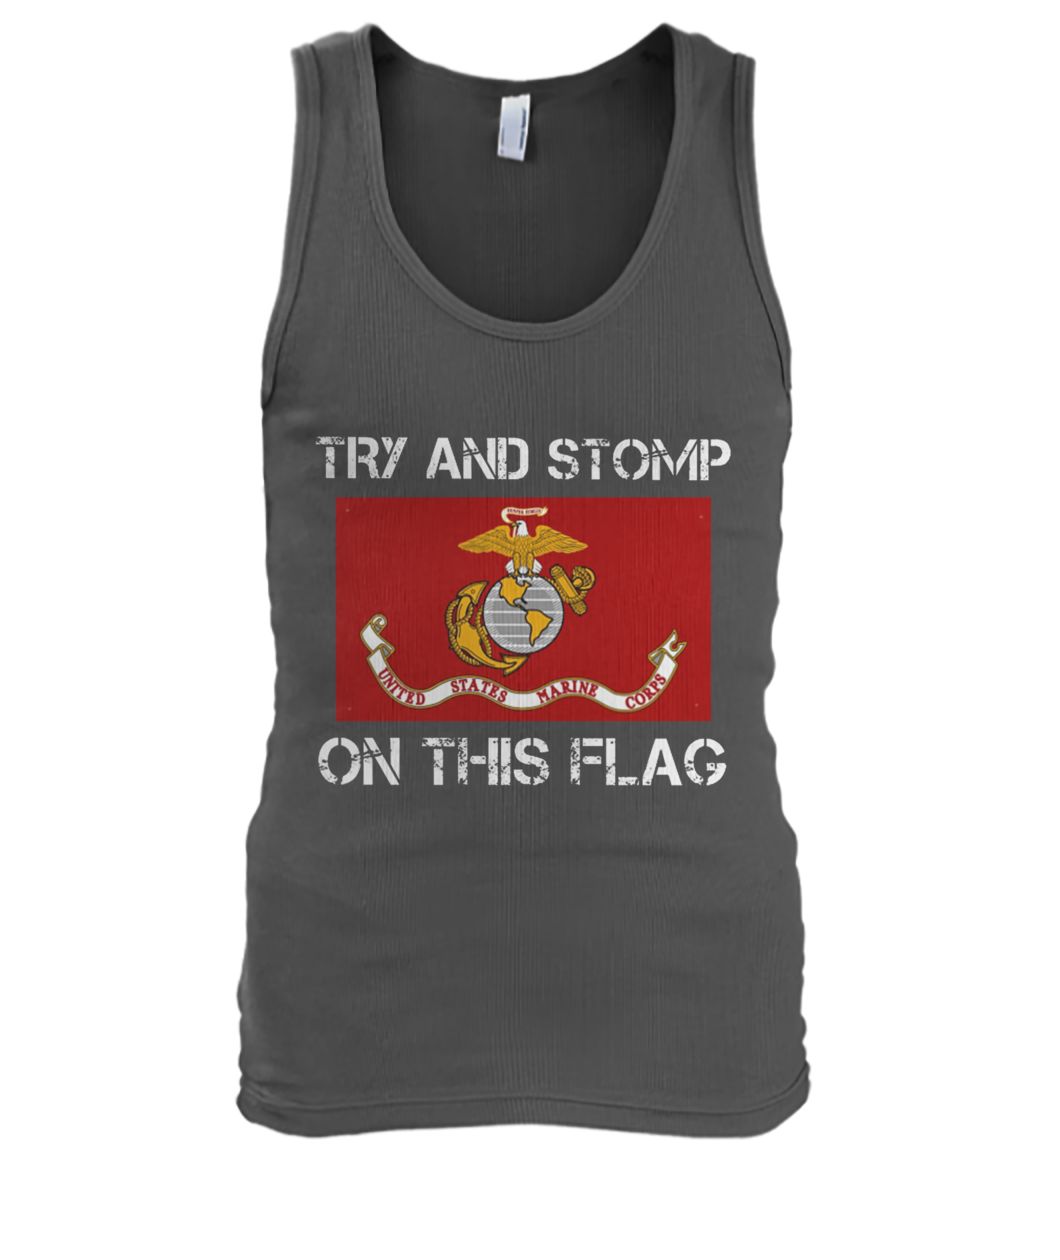 Try and stomp on this flag united states marine corps flag men's tank top